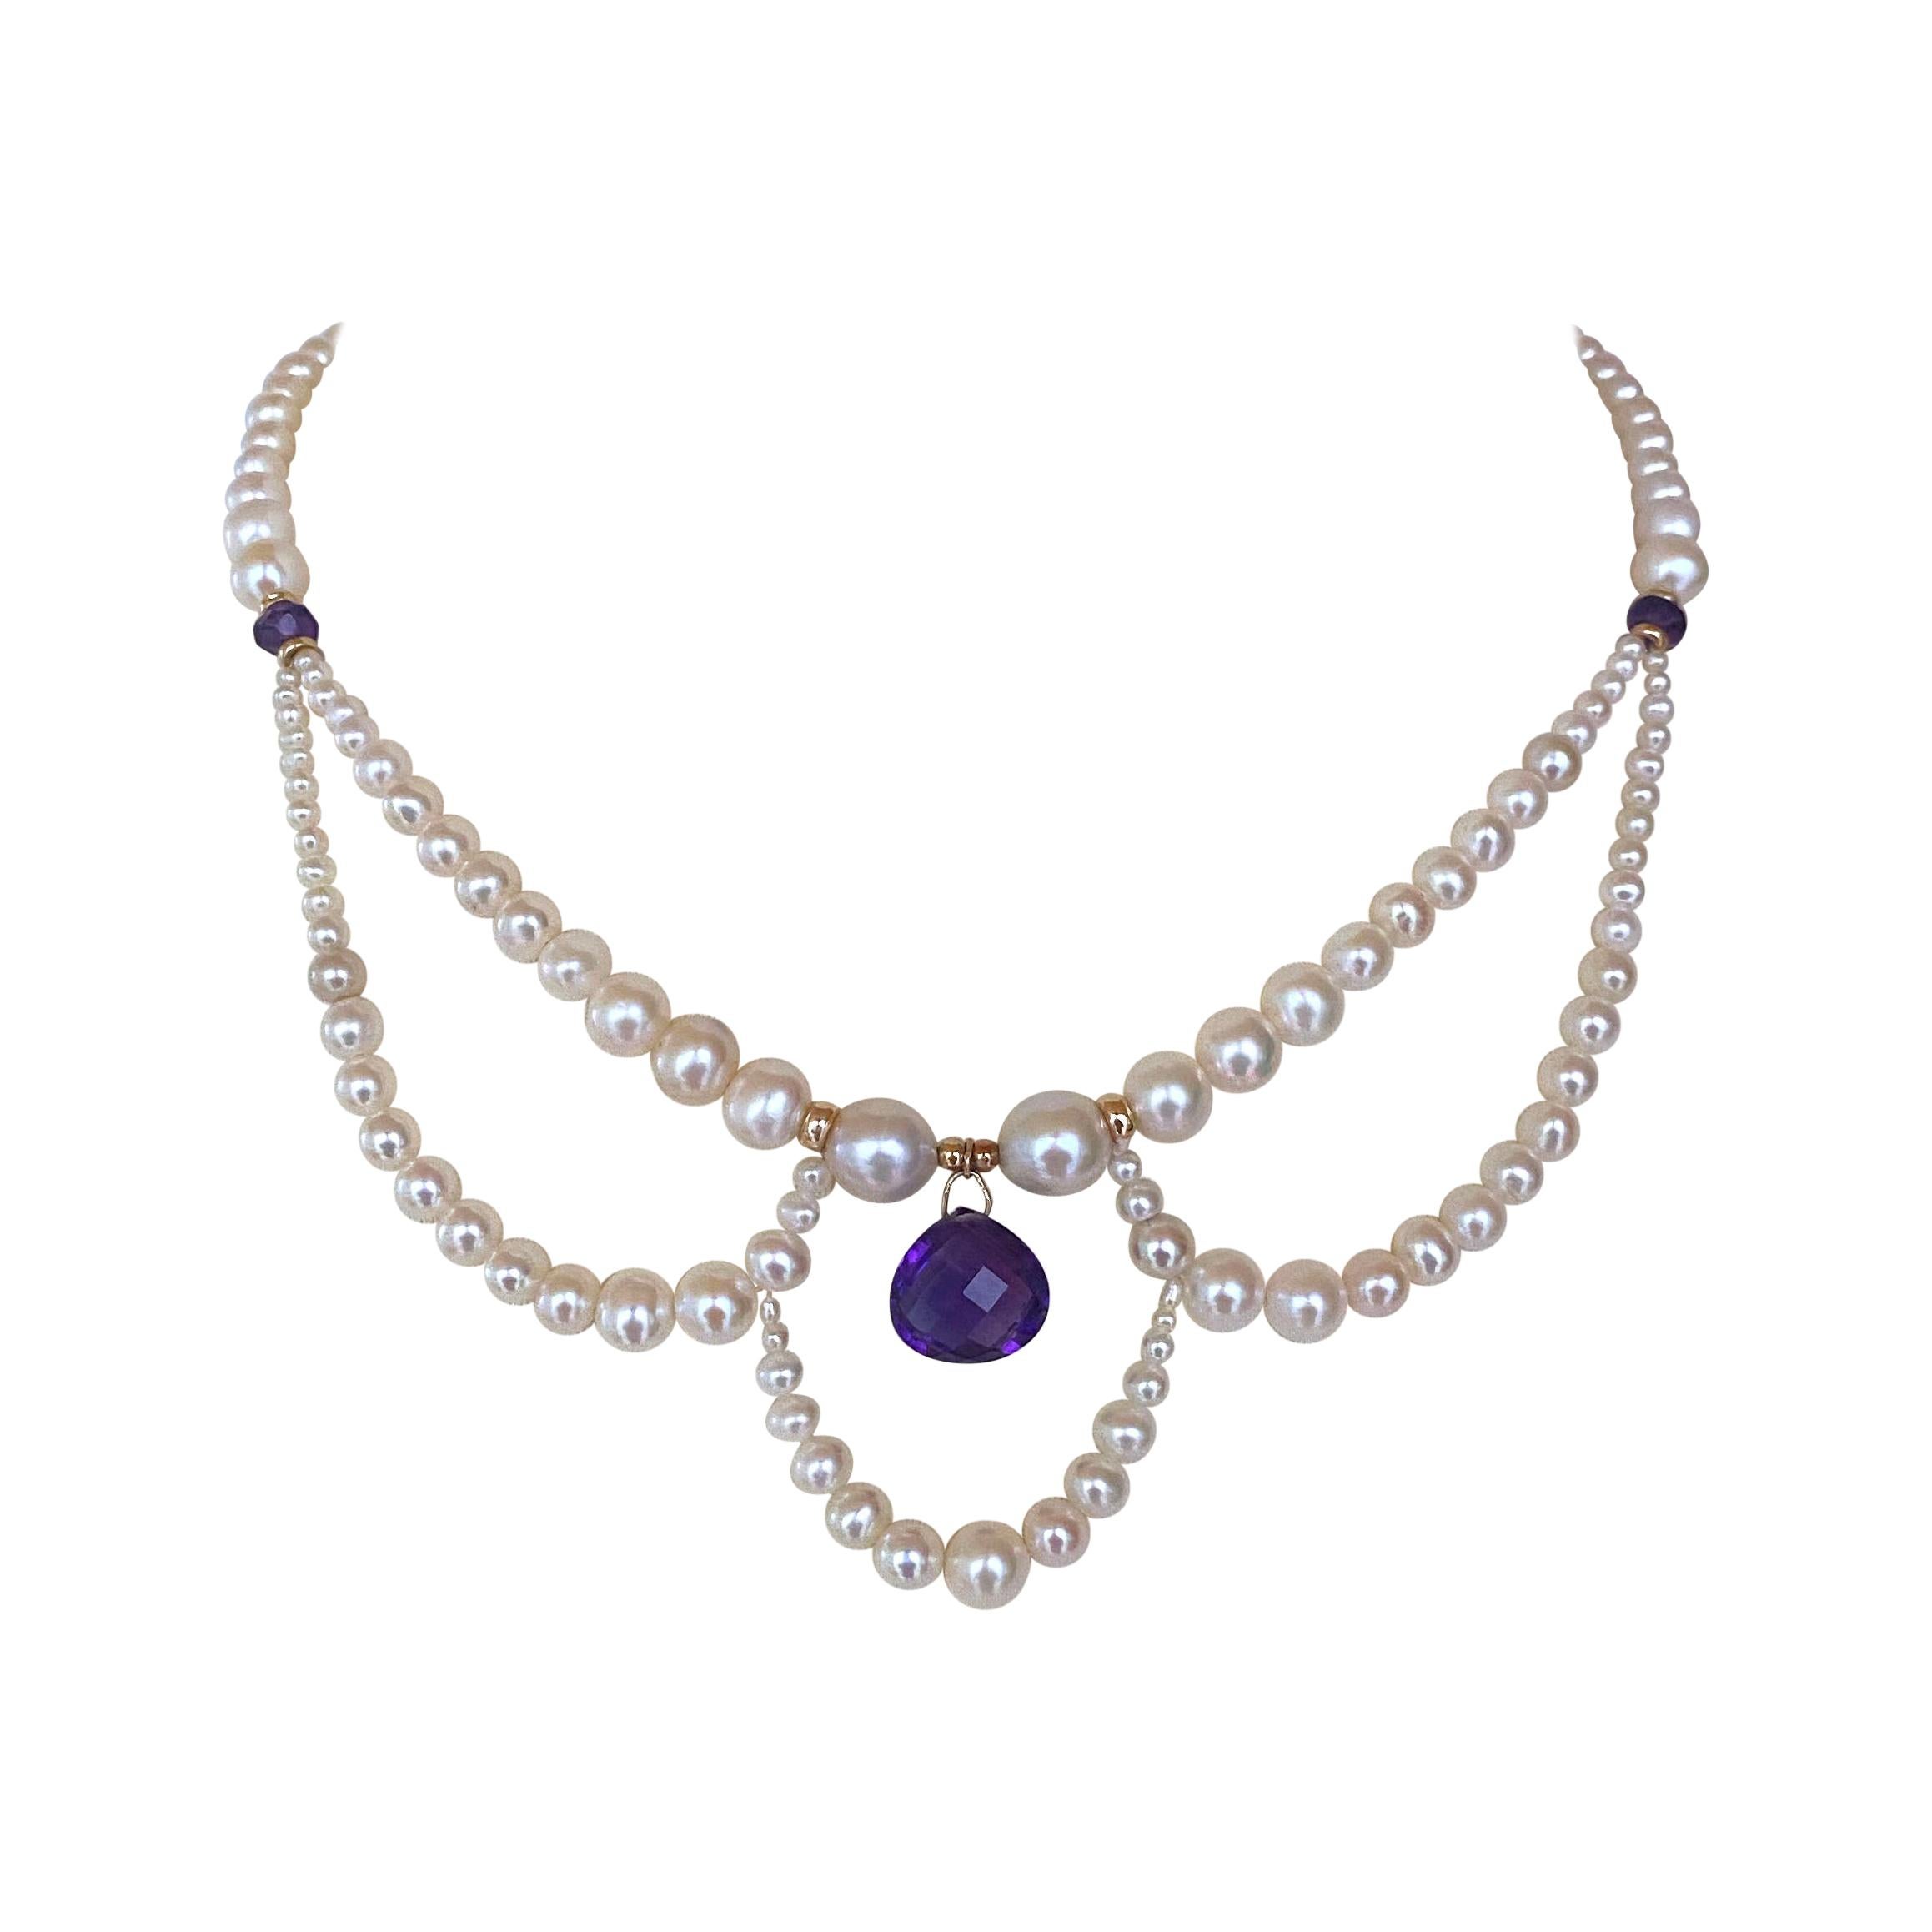 Marina J. Graduated Pearl Necklace with Teardrop Amethyst and 14k Yellow Gold